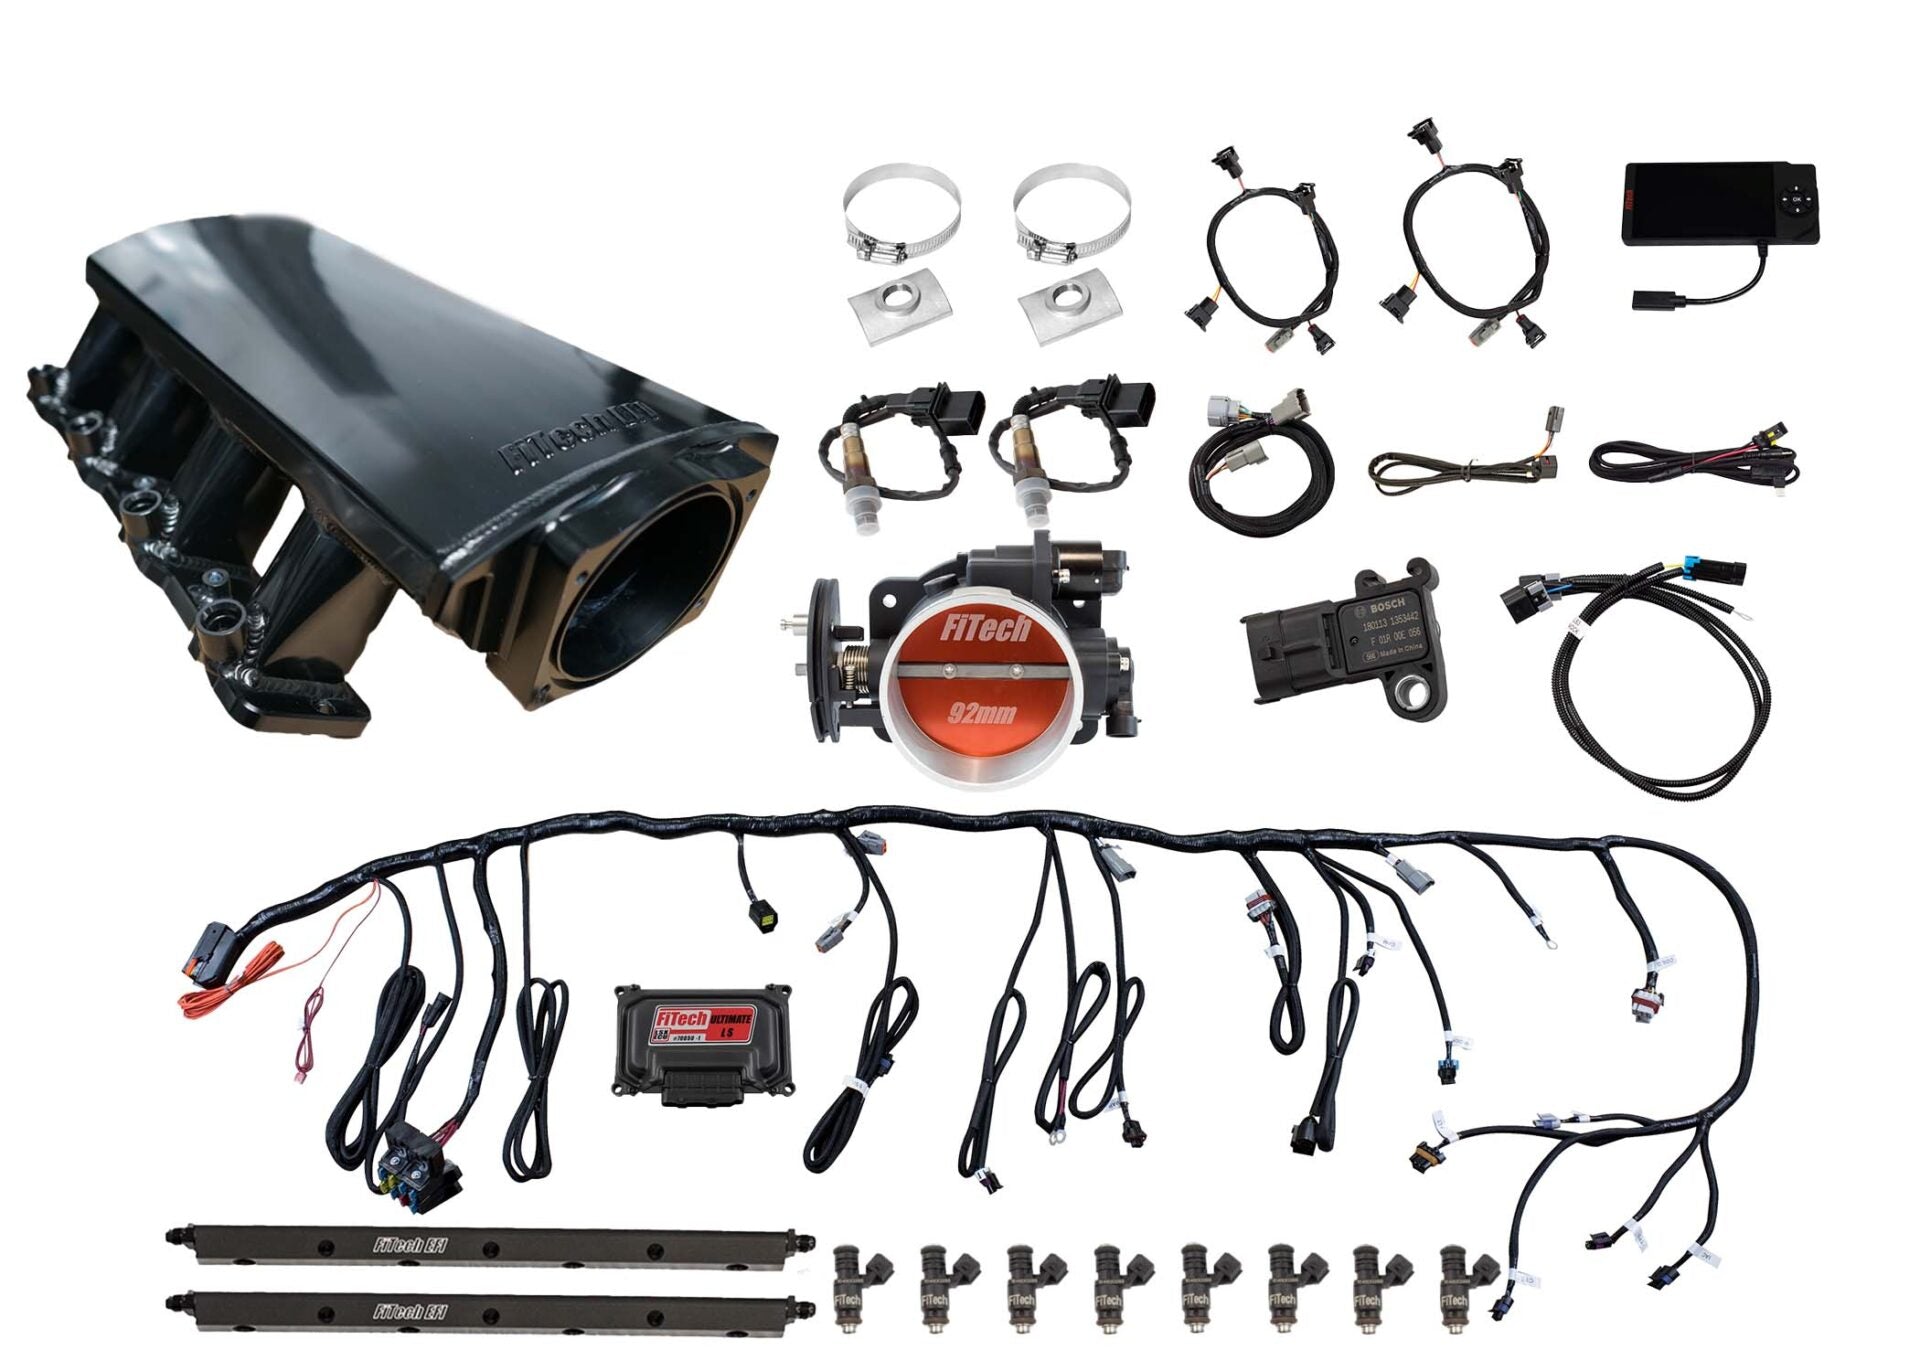 FiTech 70012 Ultimate LS Kit (500 HP, Transmission Control)-for LS3/L92